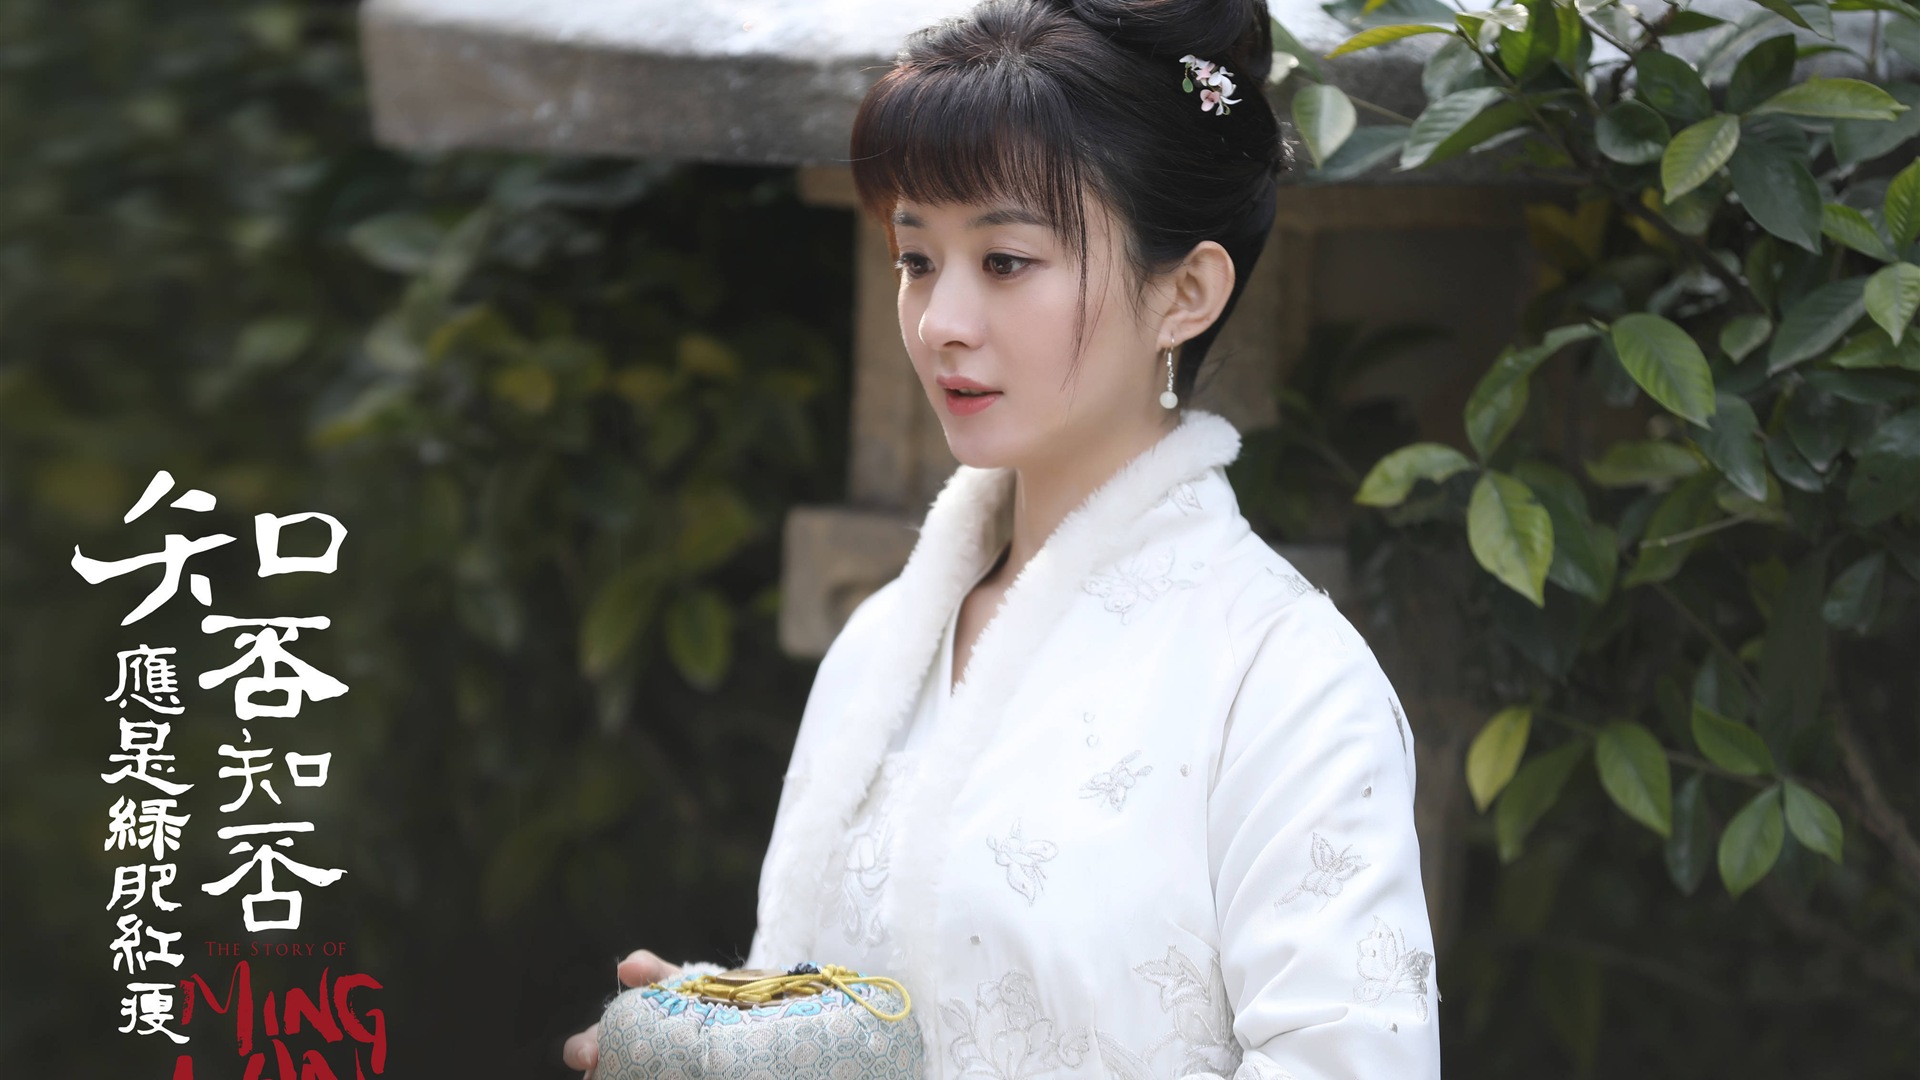 The Story Of MingLan, TV series HD wallpapers #51 - 1920x1080